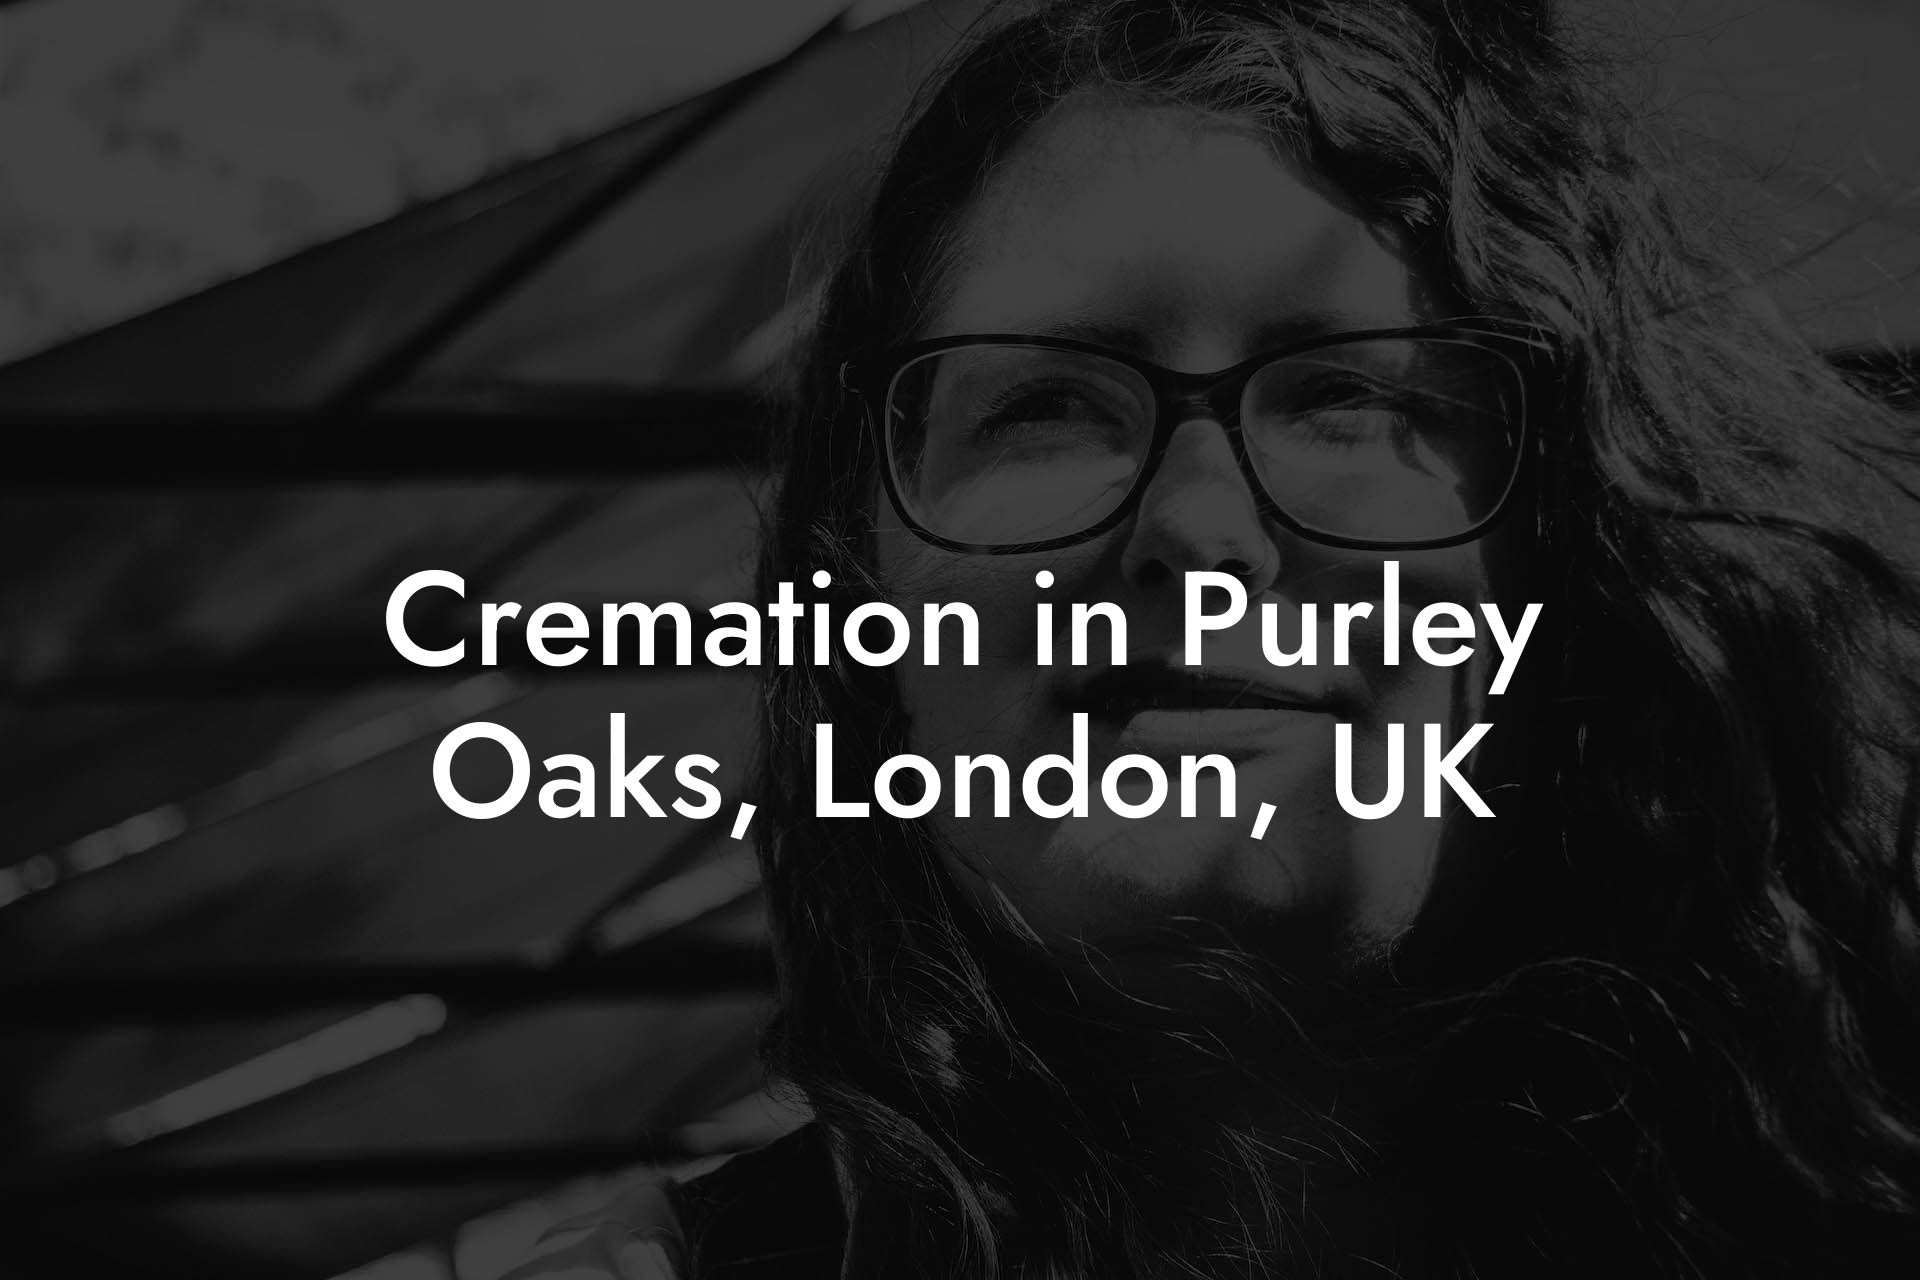 Cremation in Purley Oaks, London, UK